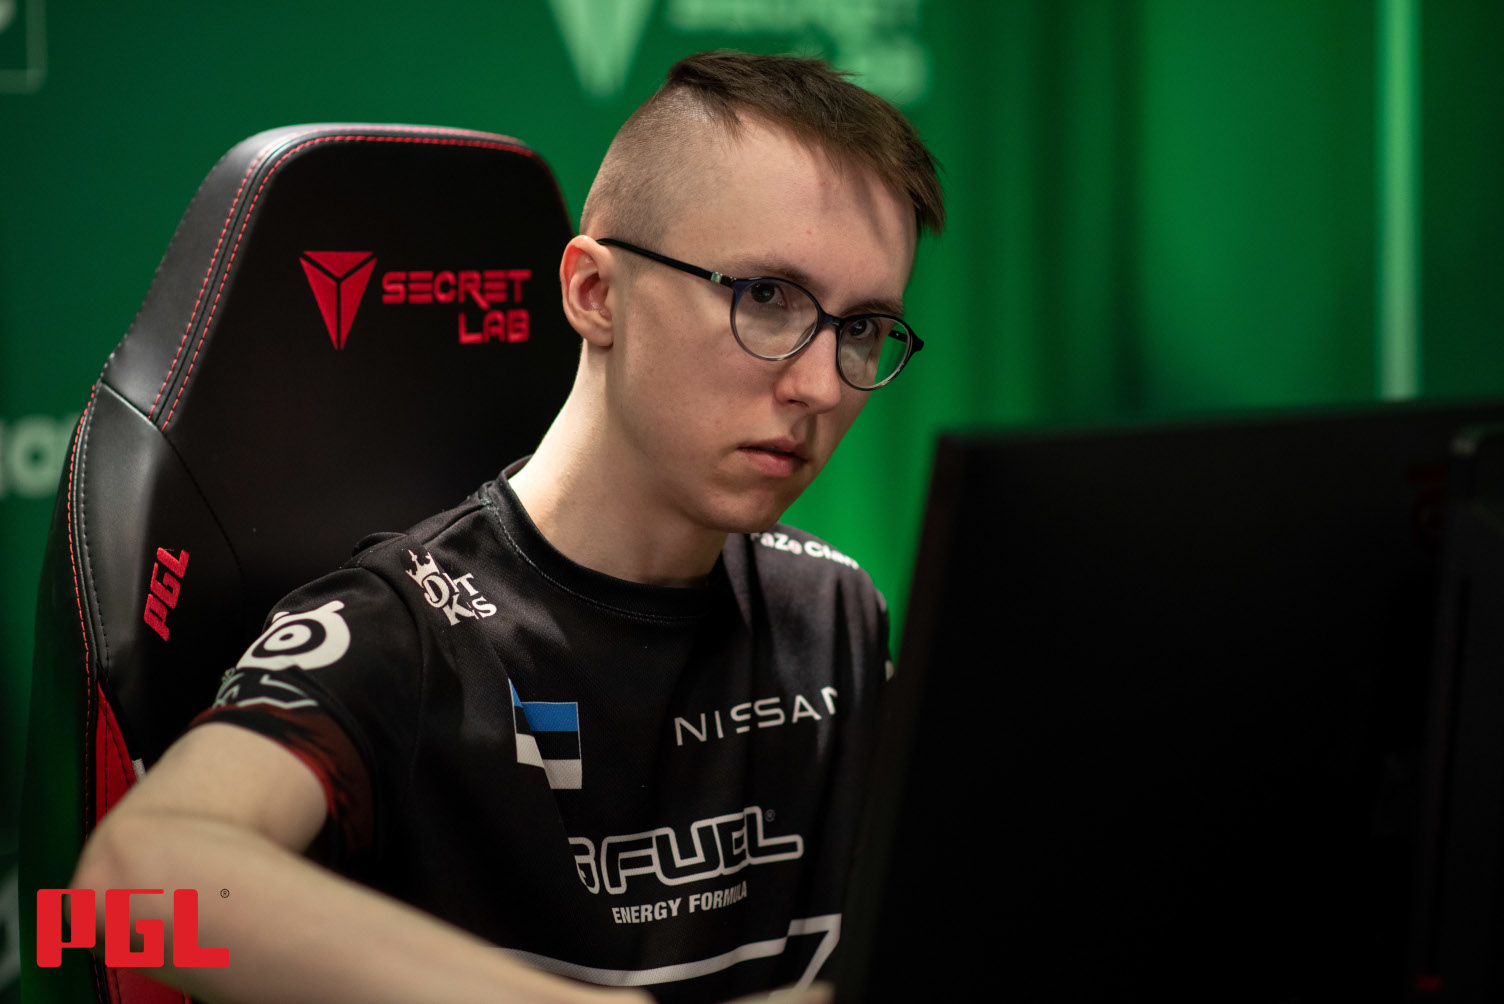 Ropz’s salary may surprise